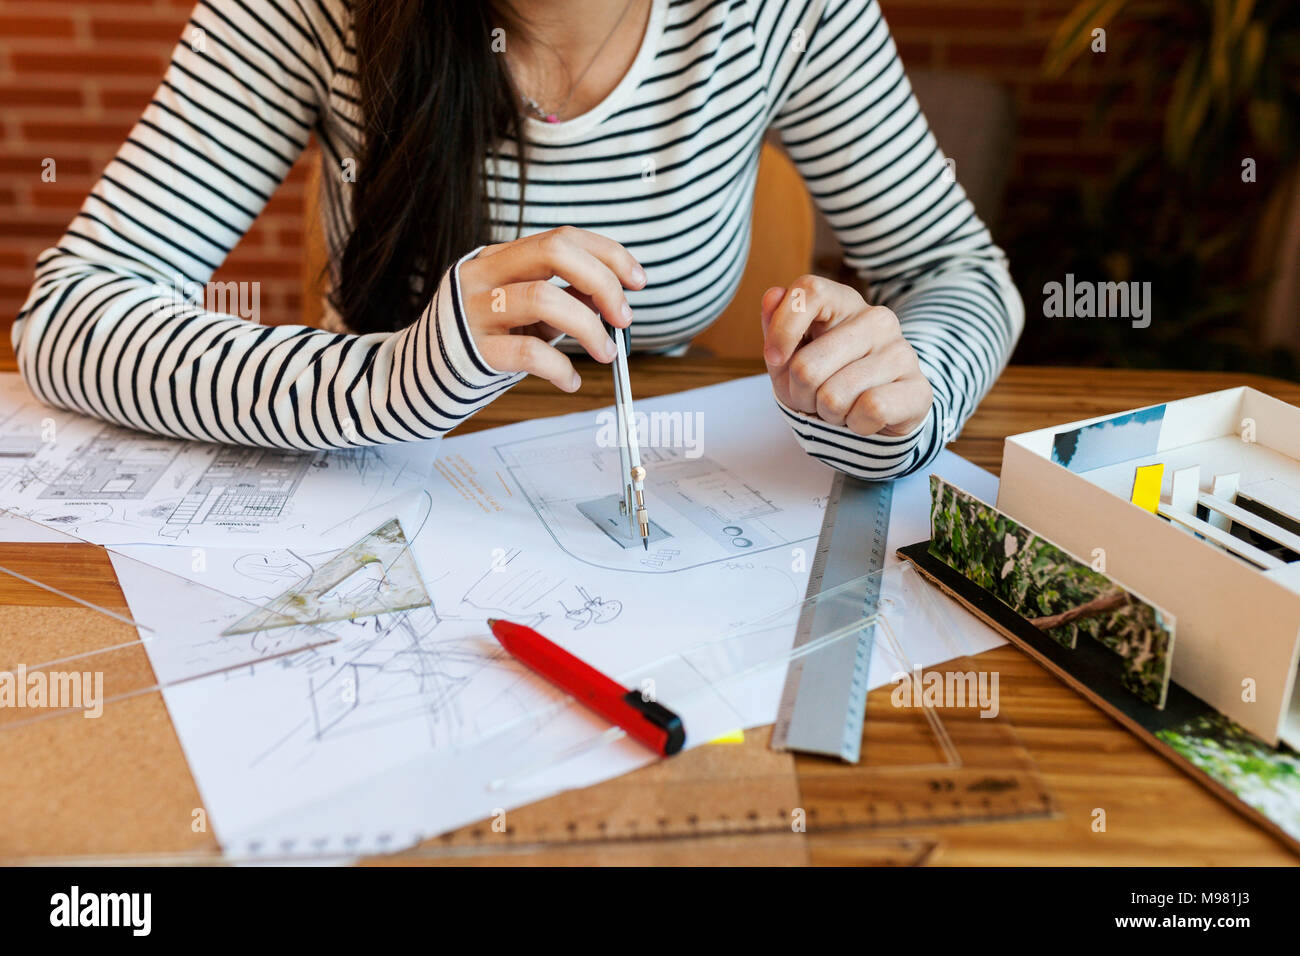 Young woman working in architecture office, drawing blueprints Stock Photo